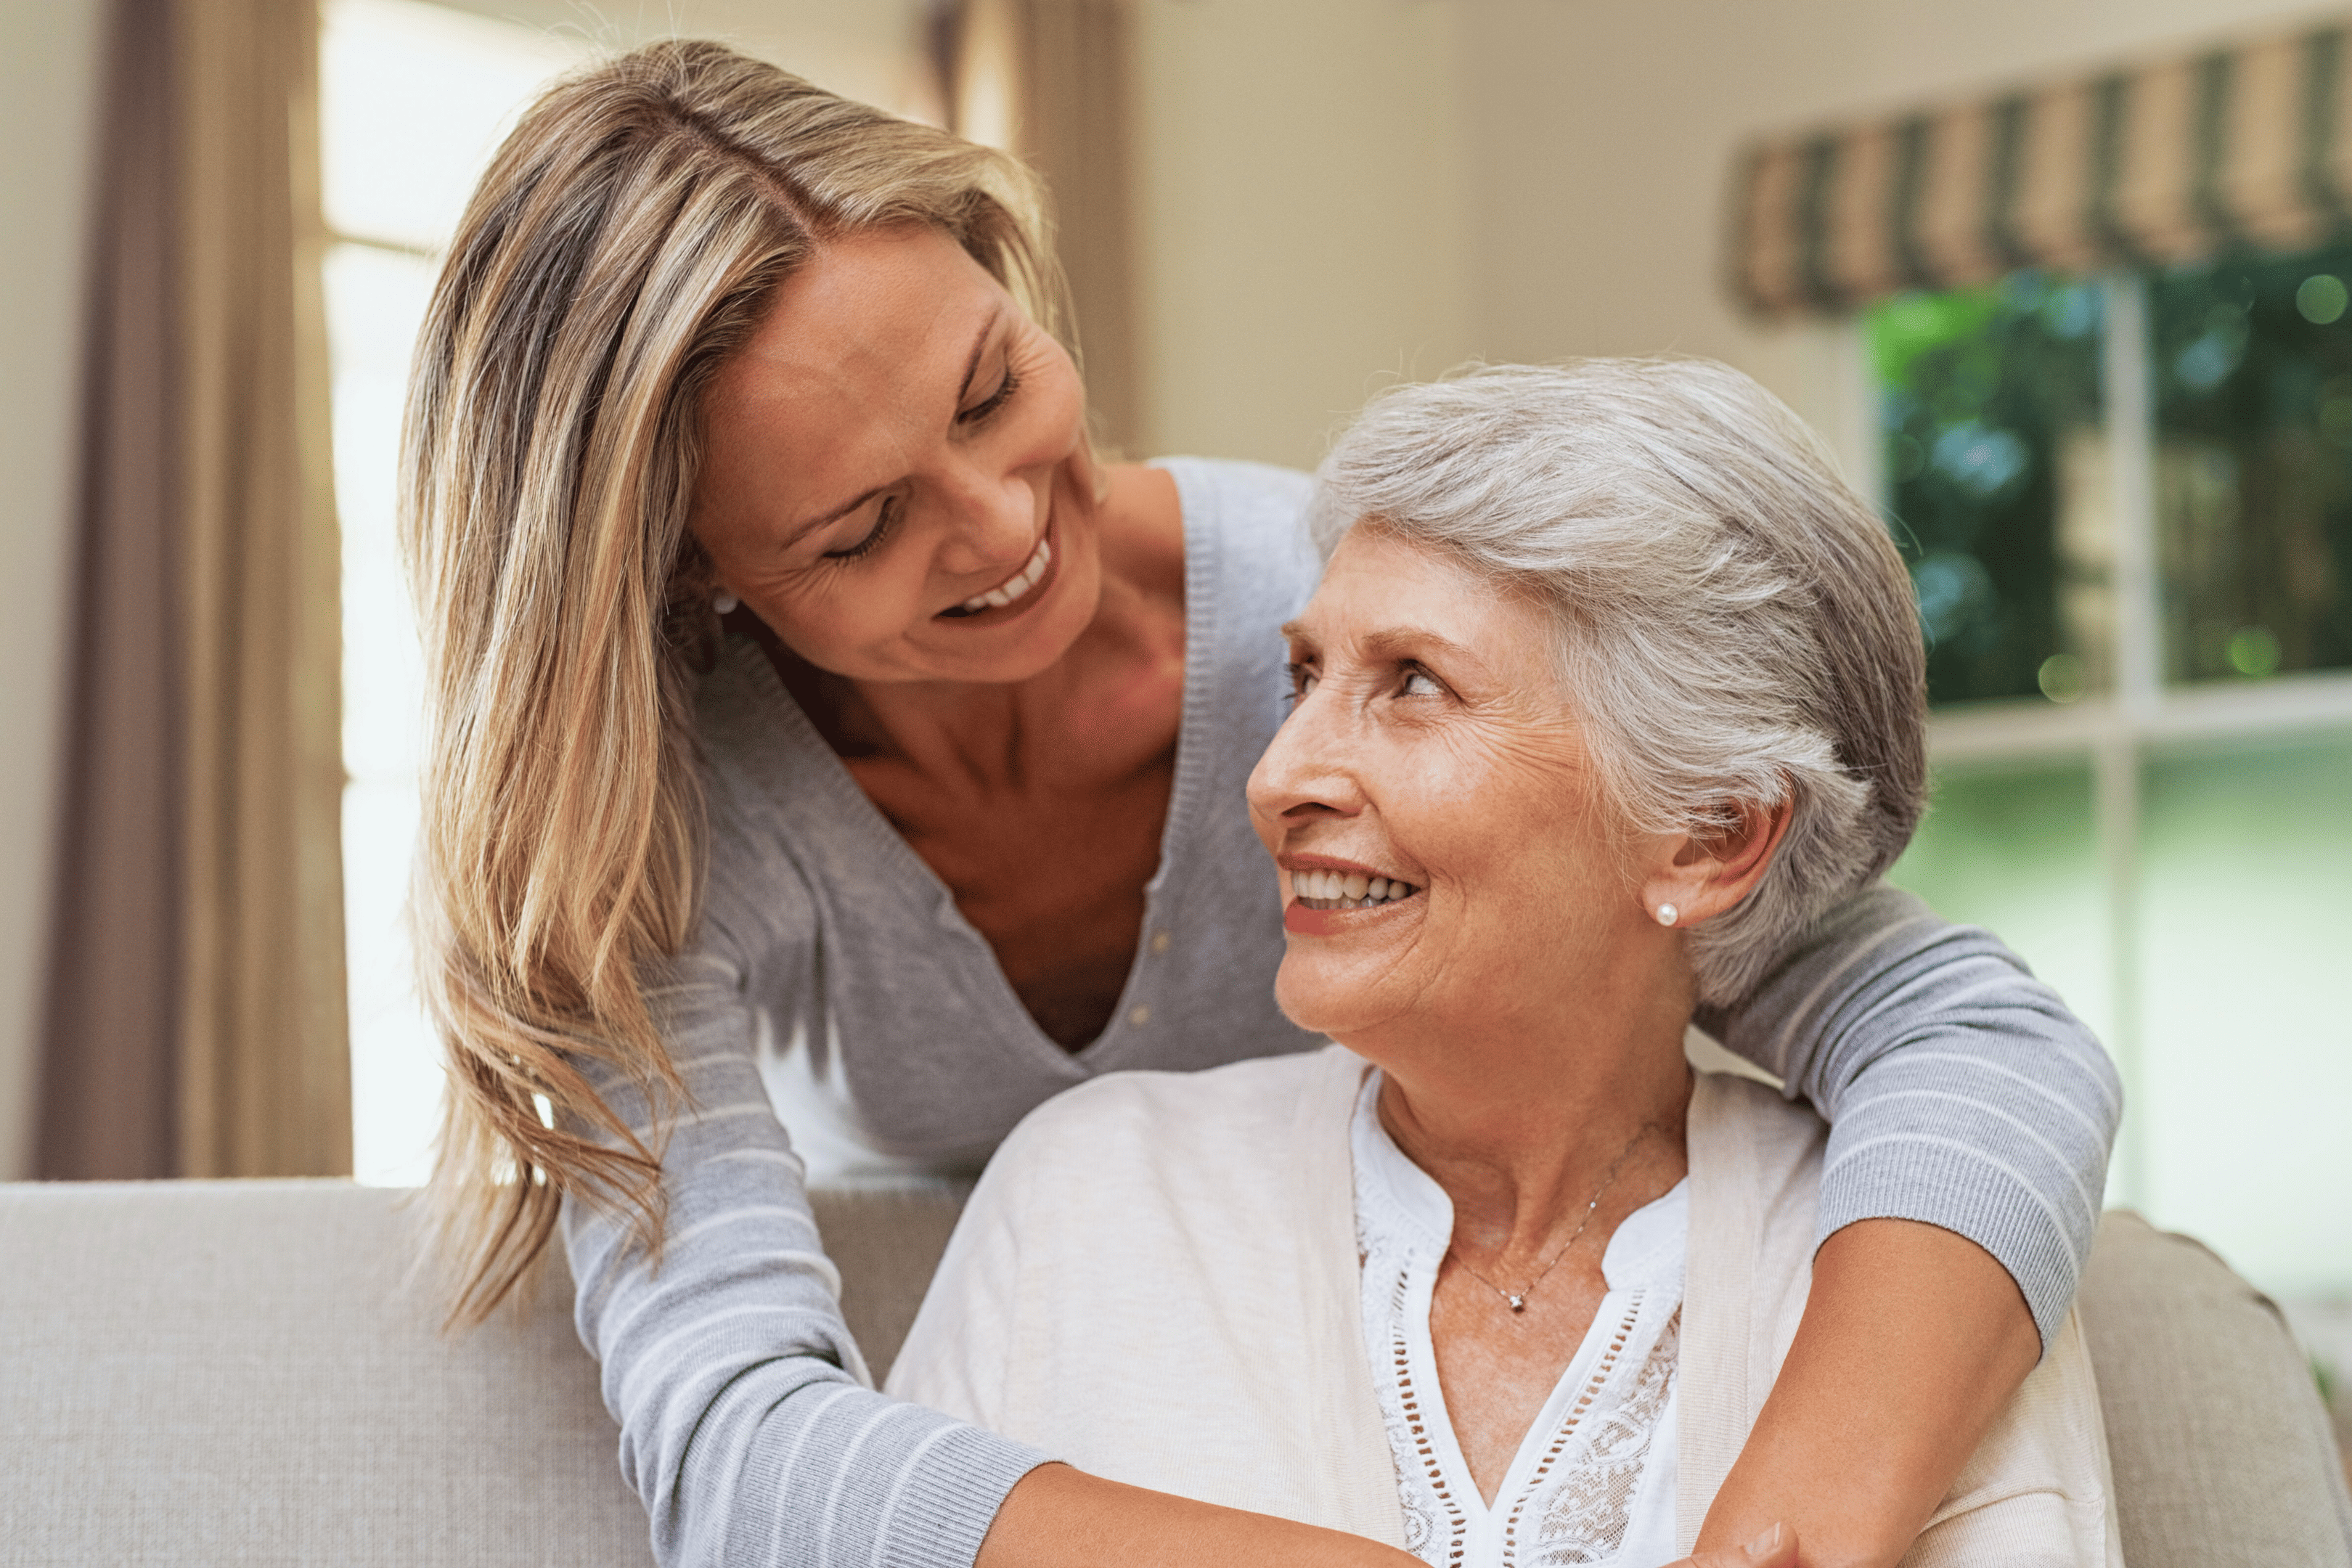 Most family caregivers feeling trapped caring for an elderly parent find it emotionally draining. Caring for elderly parents or elderly relative can be a financial burden or create financial worry for the primary caregiver.